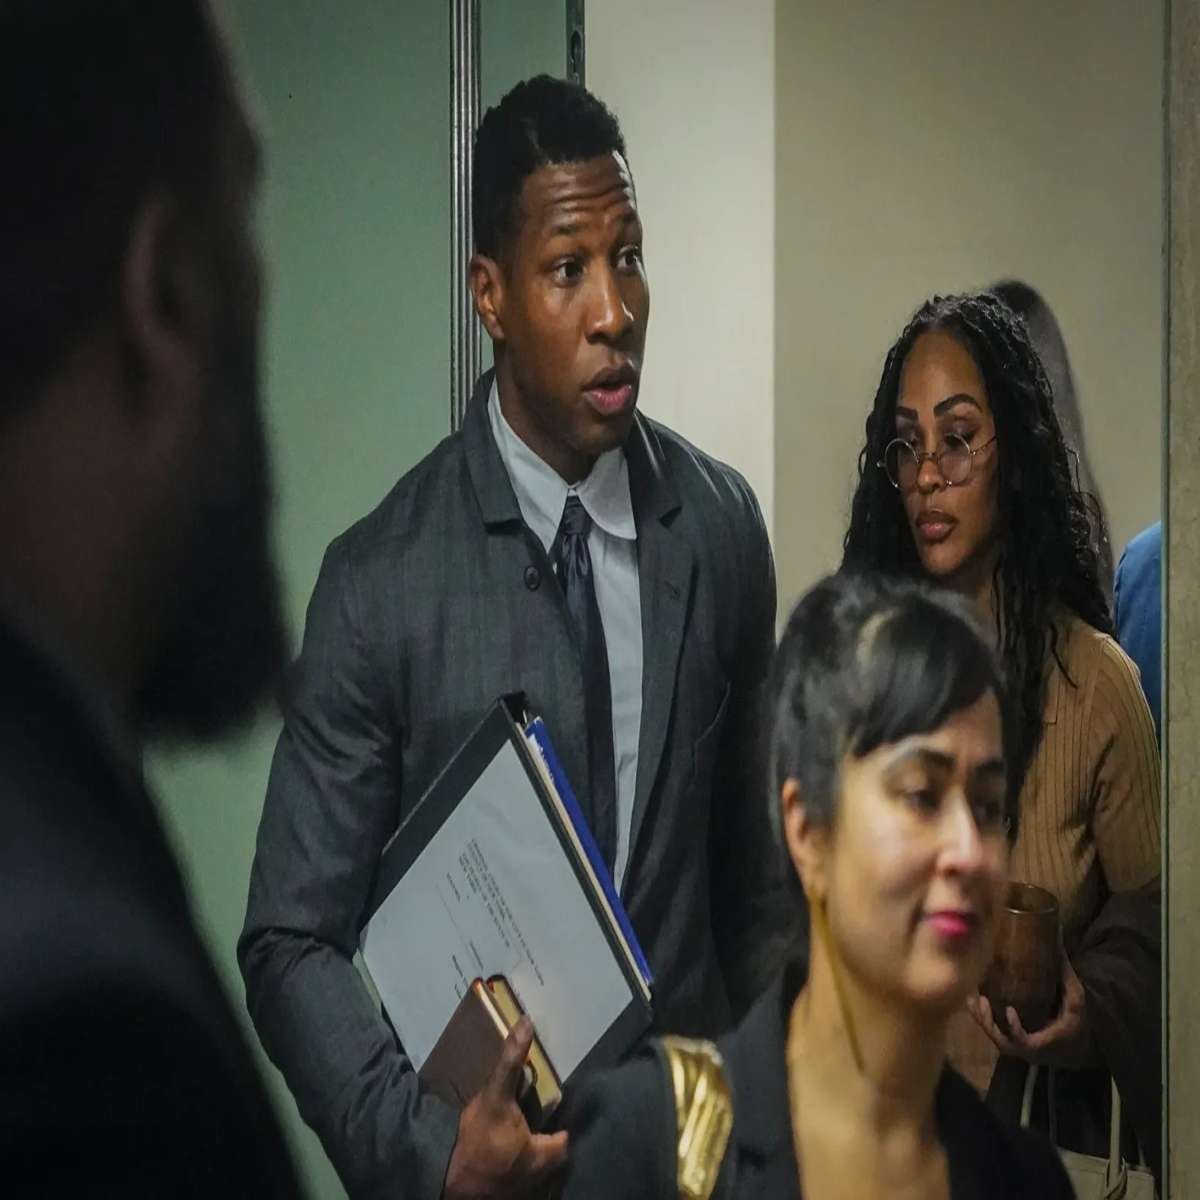 Jonathan Majors Expresses Shock and Plans Appeal Post-Conviction